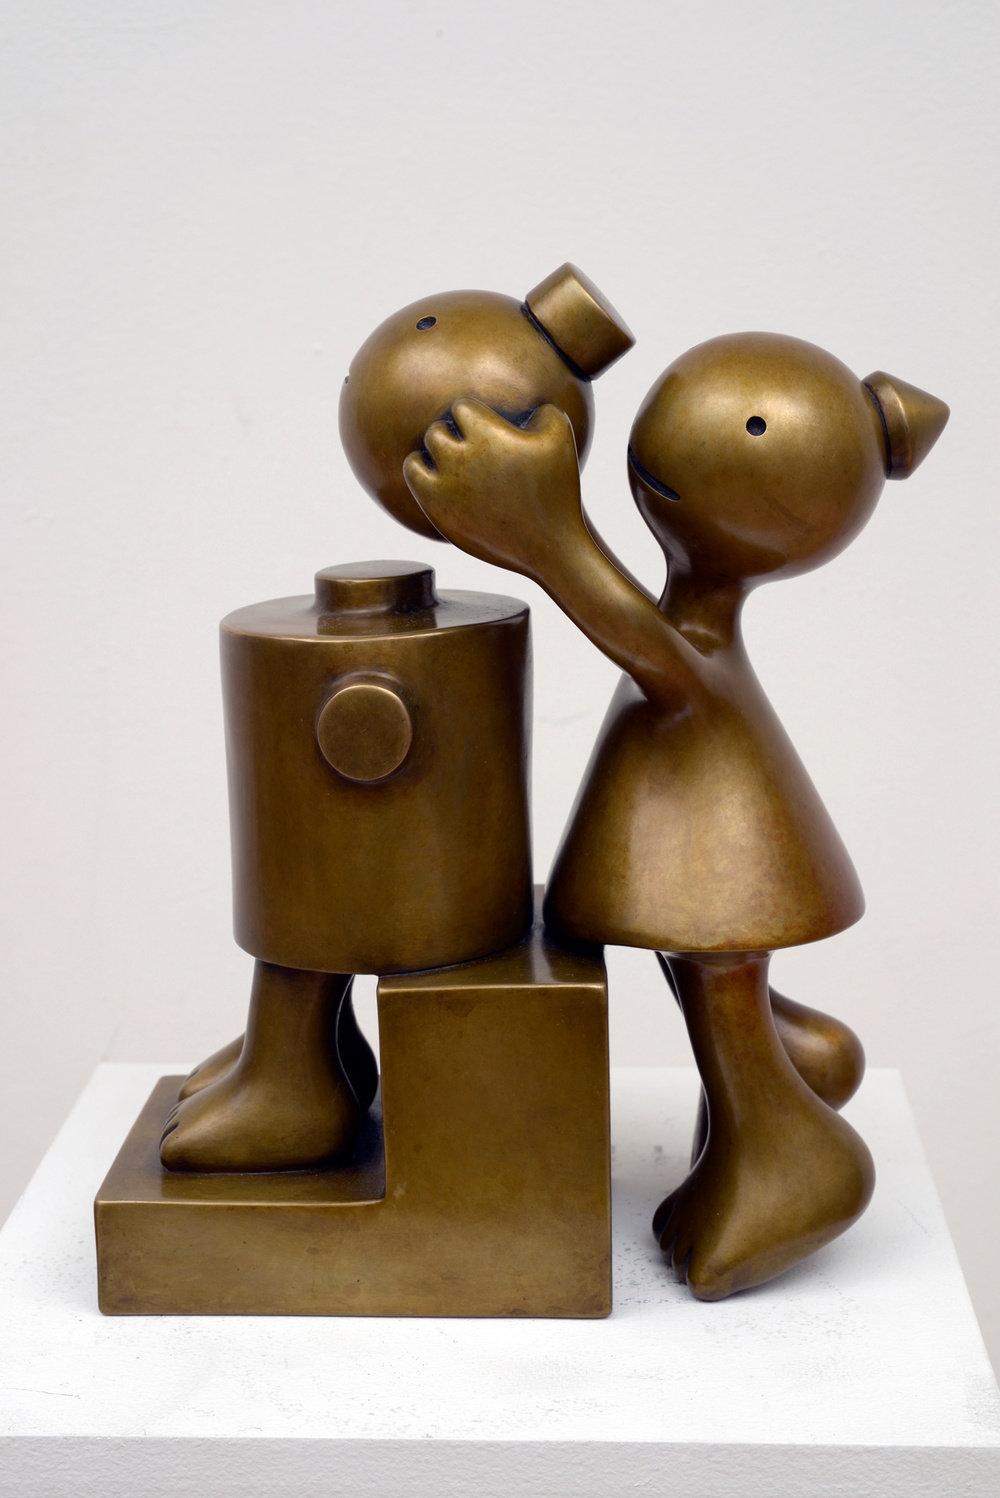 Otterness, cone fixing cylinder, 2013, bronze, ed of 9, 12 1 2 x 9 1 4 x 5 in 